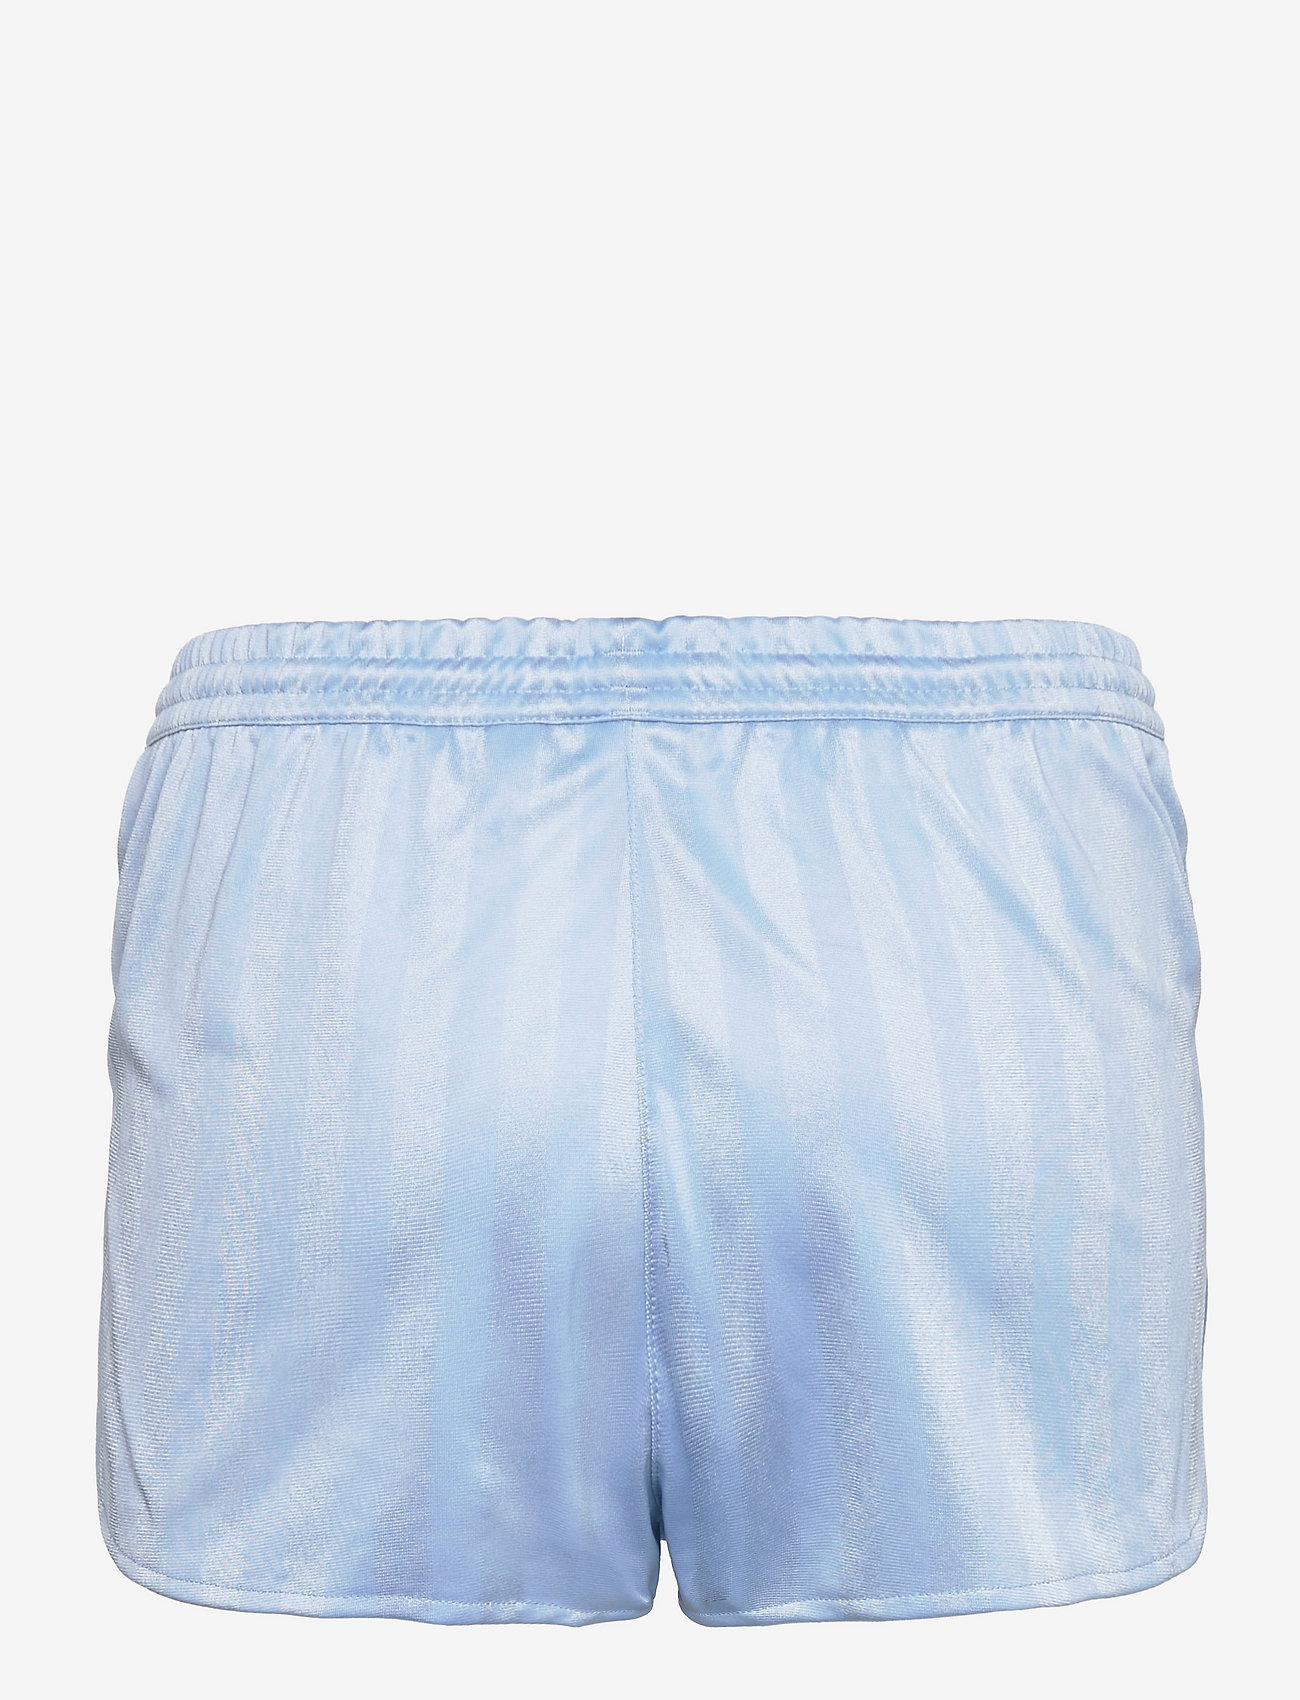 adidas Originals - Striped Shorts W - lowest prices - ambsky - 1